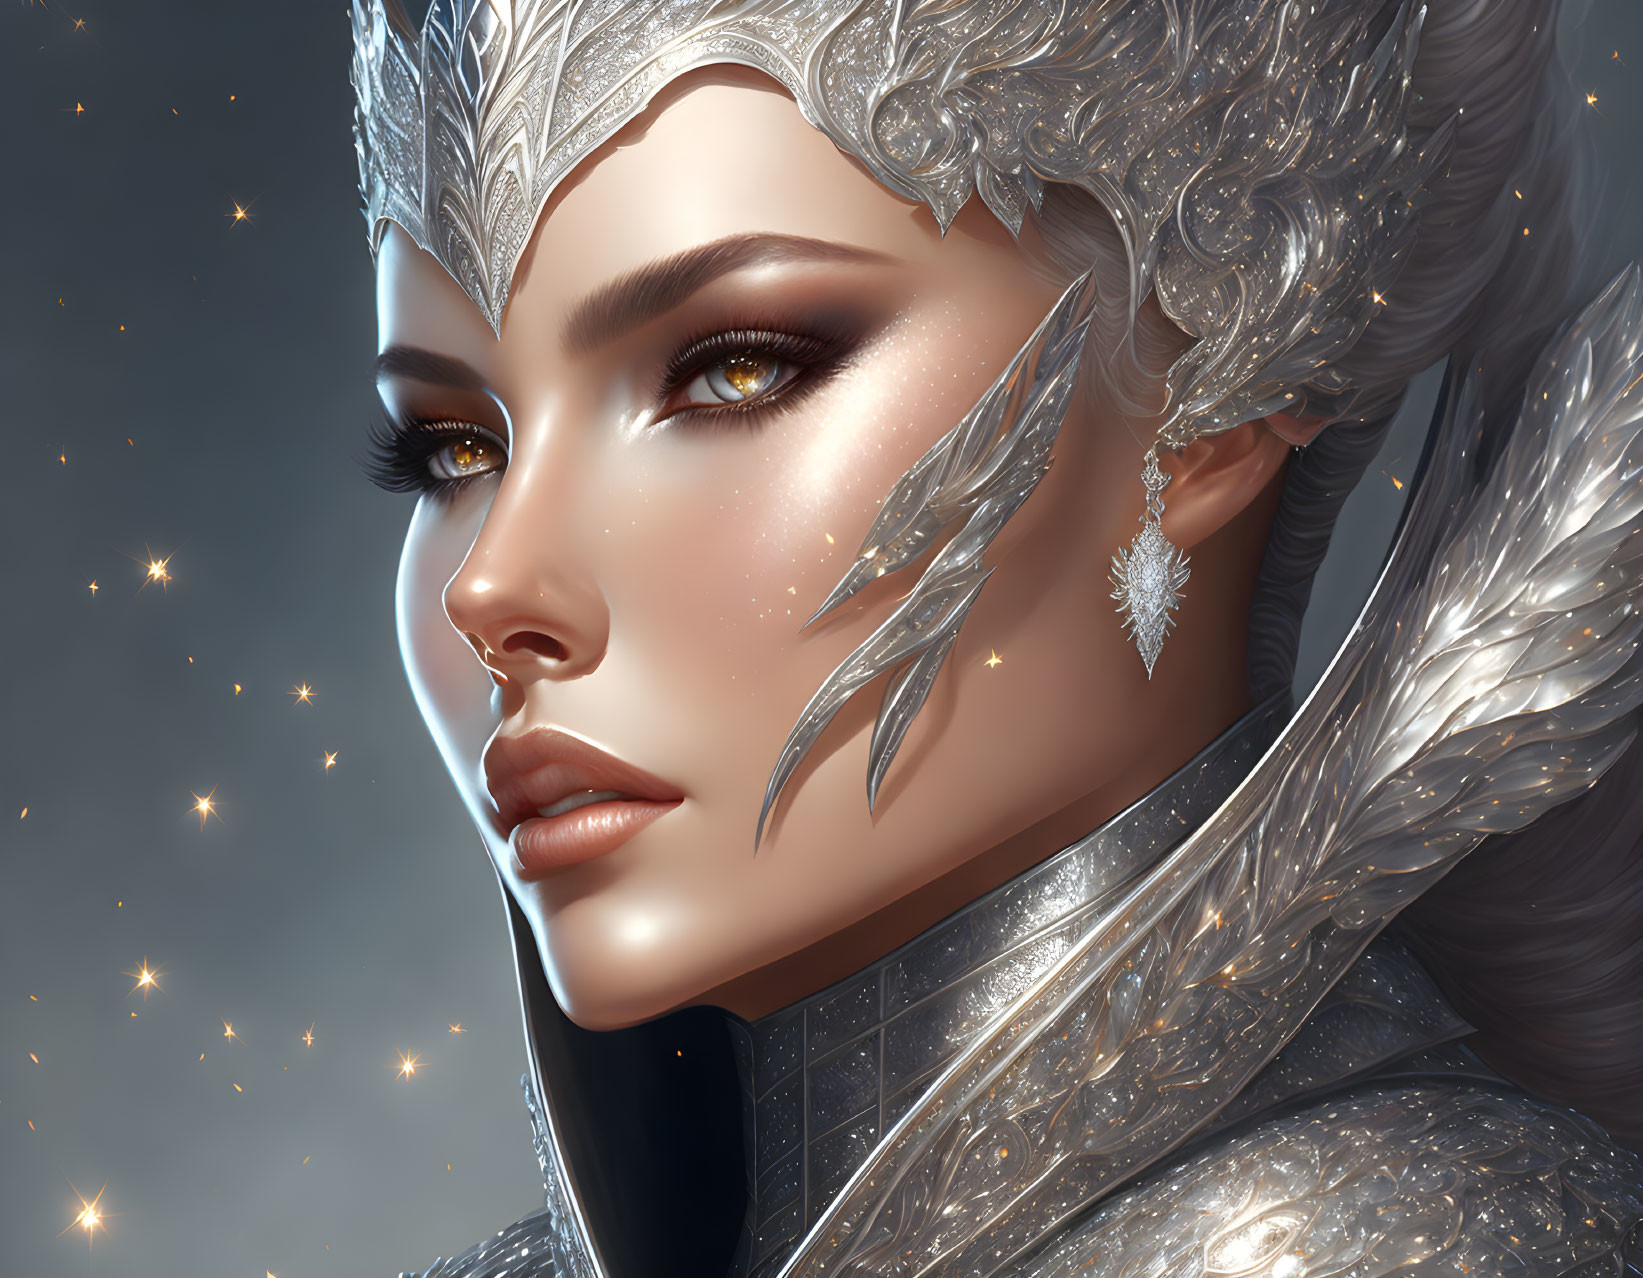 Fantastical female character in silver armor and starry headdress on gray background.